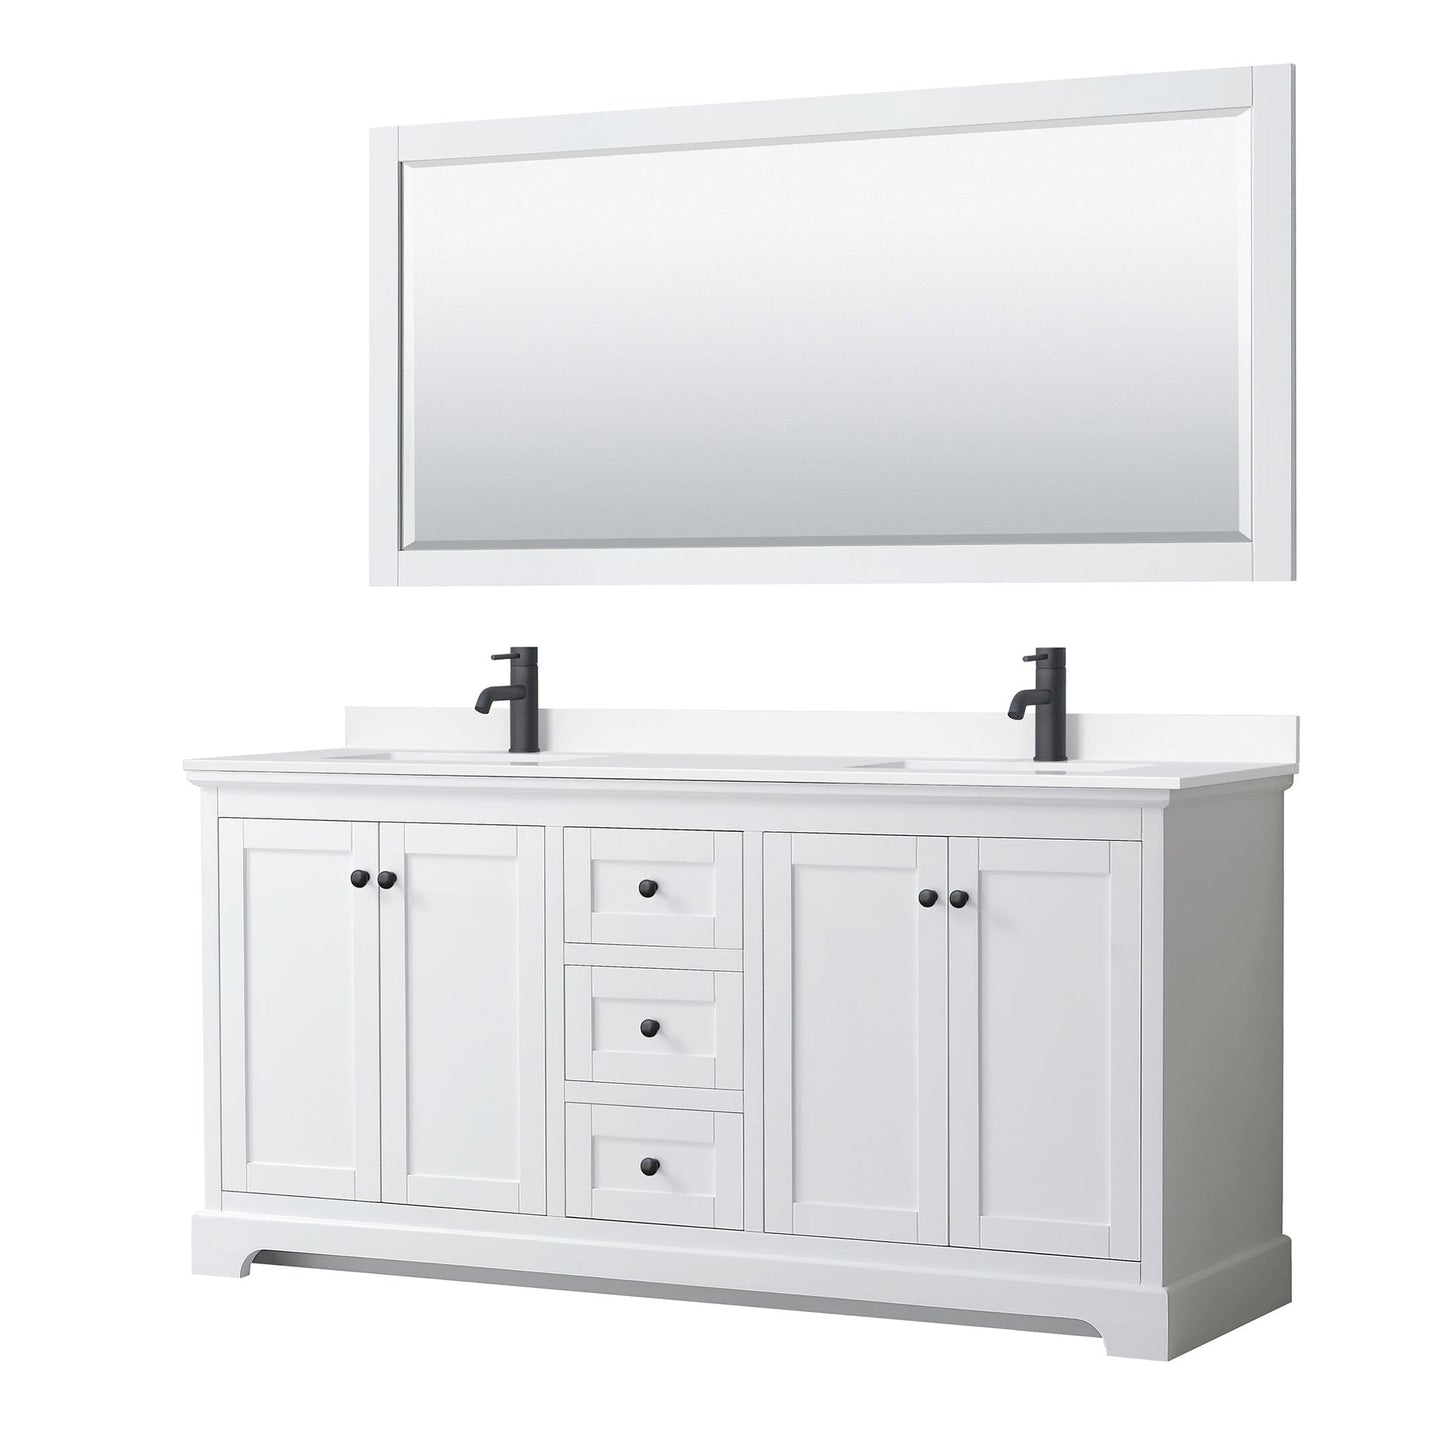 Avery 72" Double Bathroom Vanity in White, White Cultured Marble Countertop, Undermount Square Sinks, Matte Black Trim, 70" Mirror